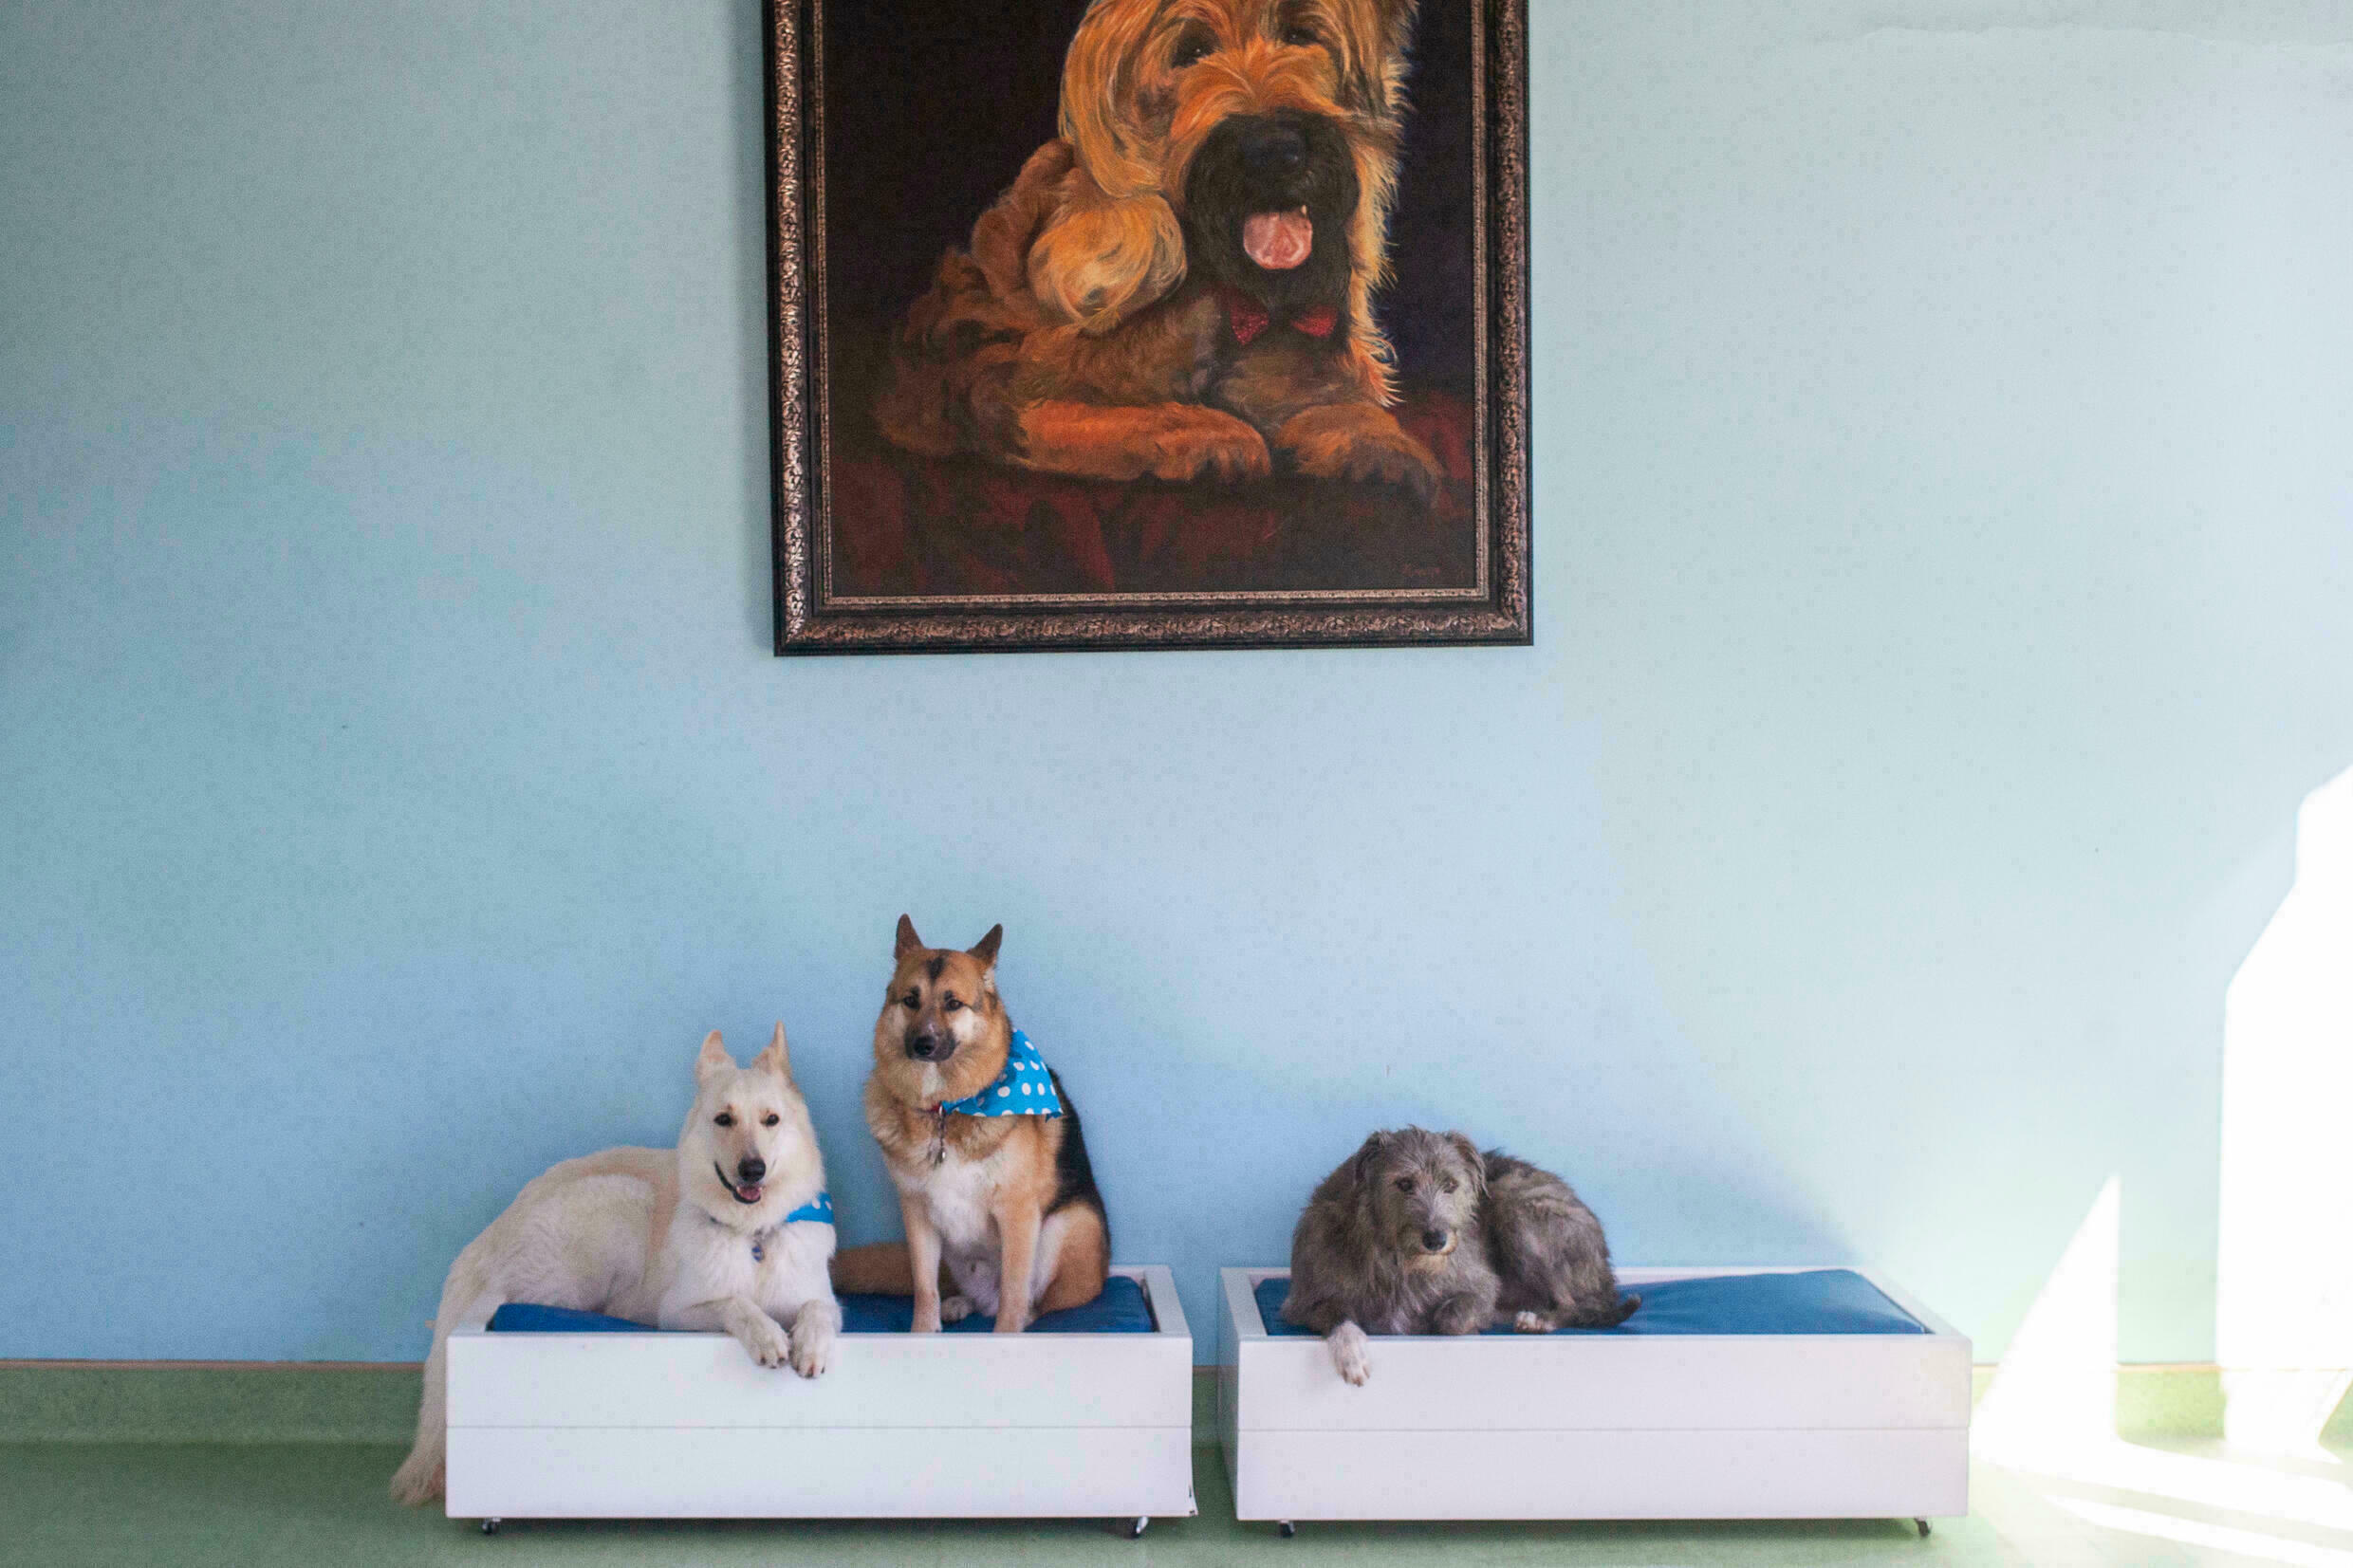 South Africa's luxury dog hotels give paws for thought